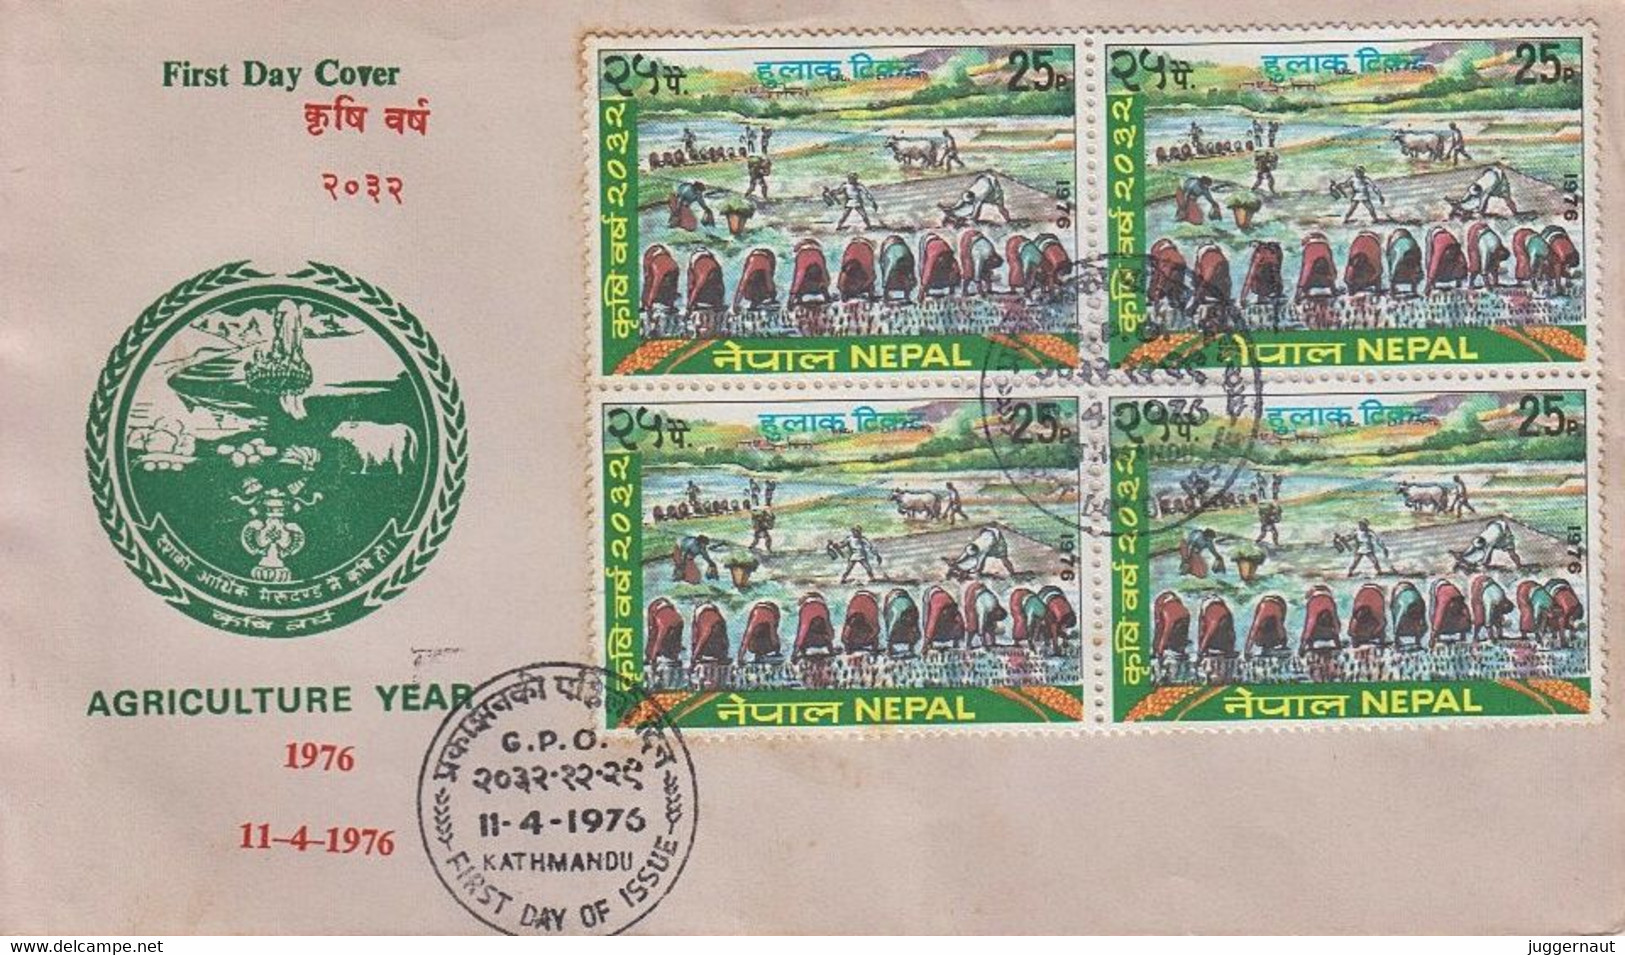 AGRICULTURE Year FDC 1976 NEPAL - Agricoltura